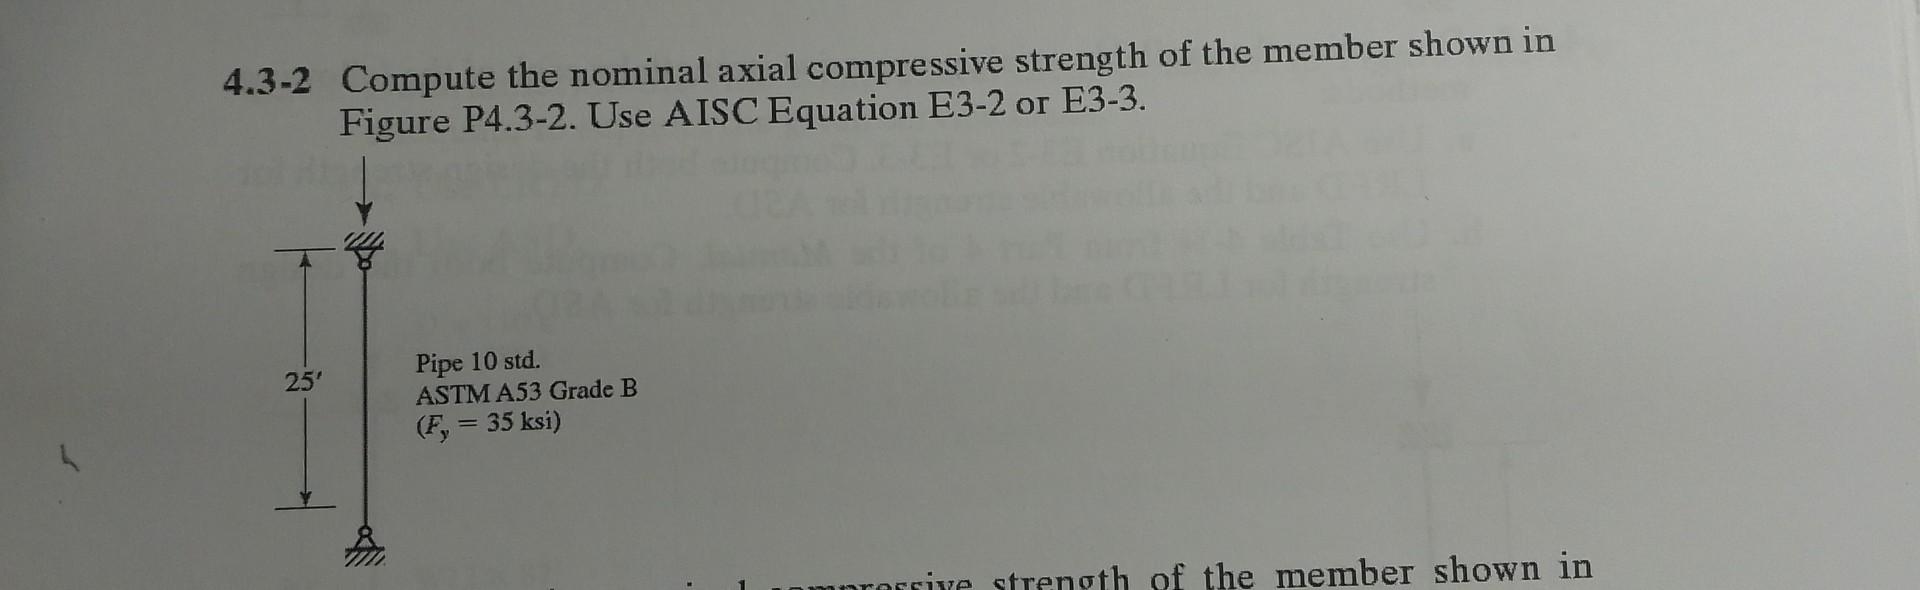 4.3-2 Compute the nominal axial compressive strength of the member shown in Figure P4.3-2. Use AISC Equation E3-2 or E3-3.